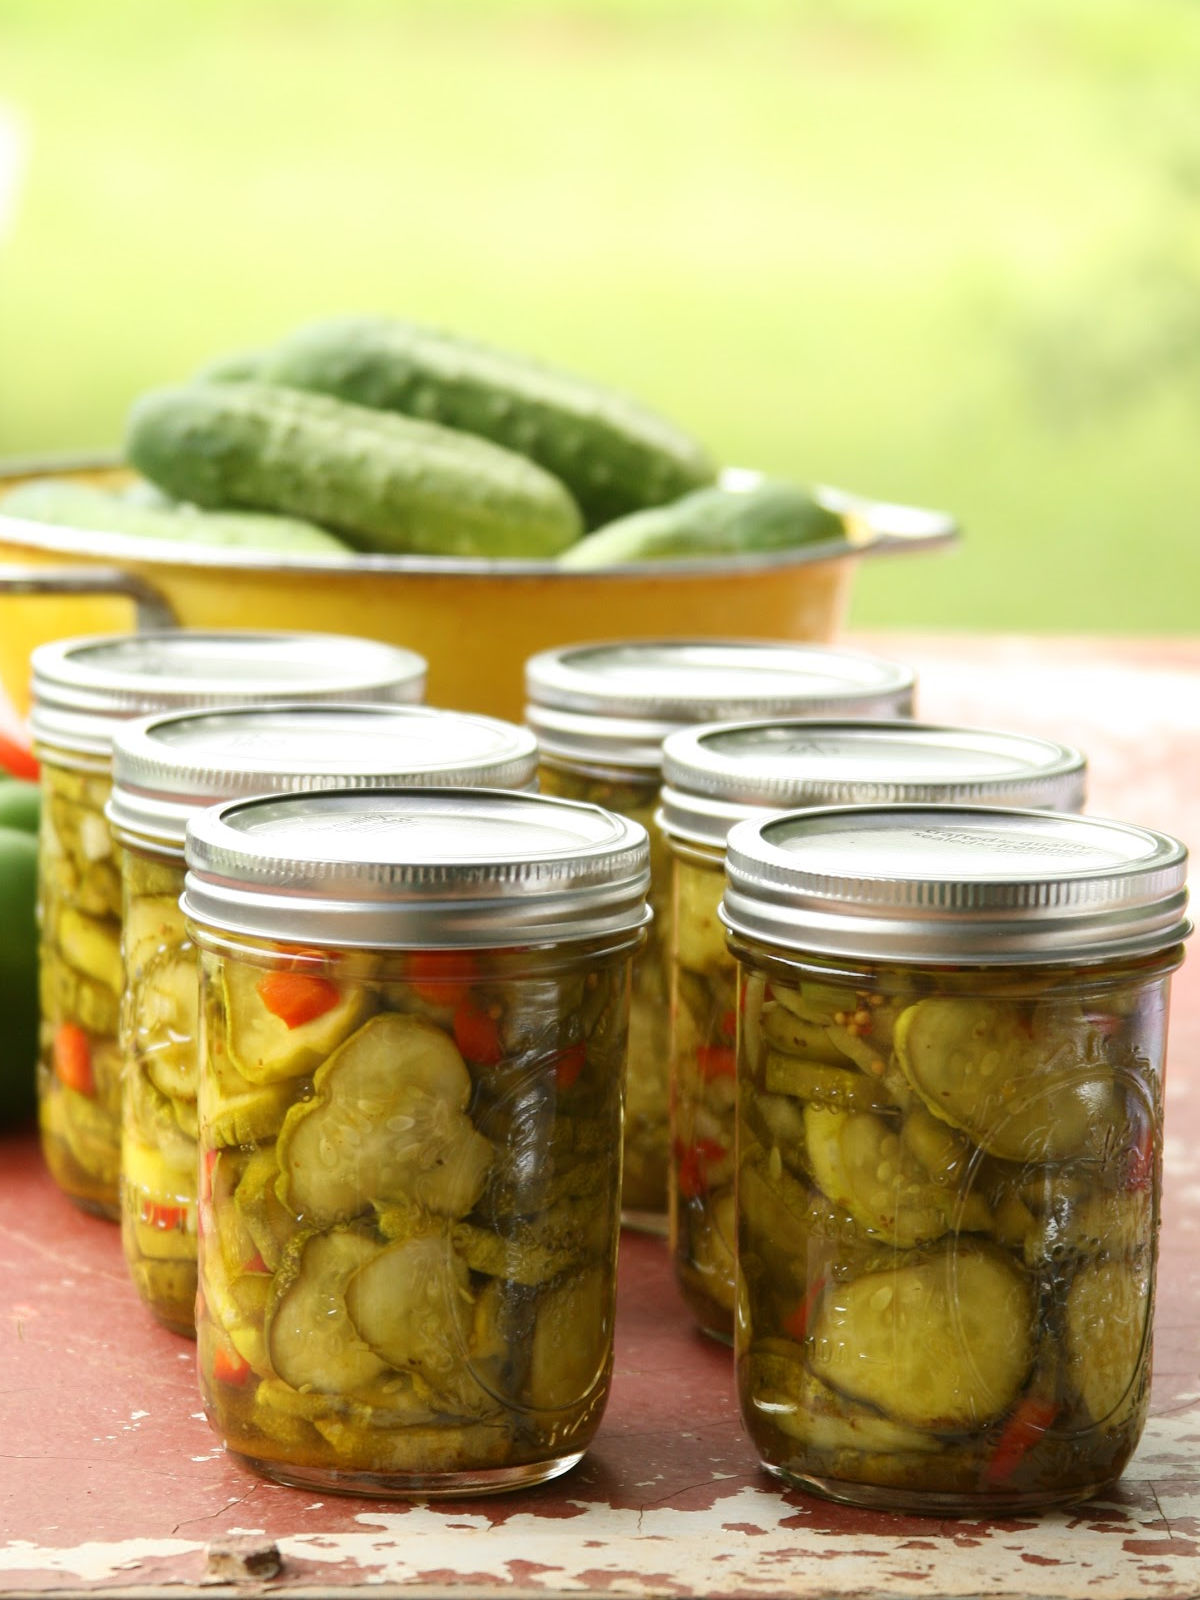 Pint jars of pickles on outdoor patio, yellow color strainer filled with cucumbers in background.